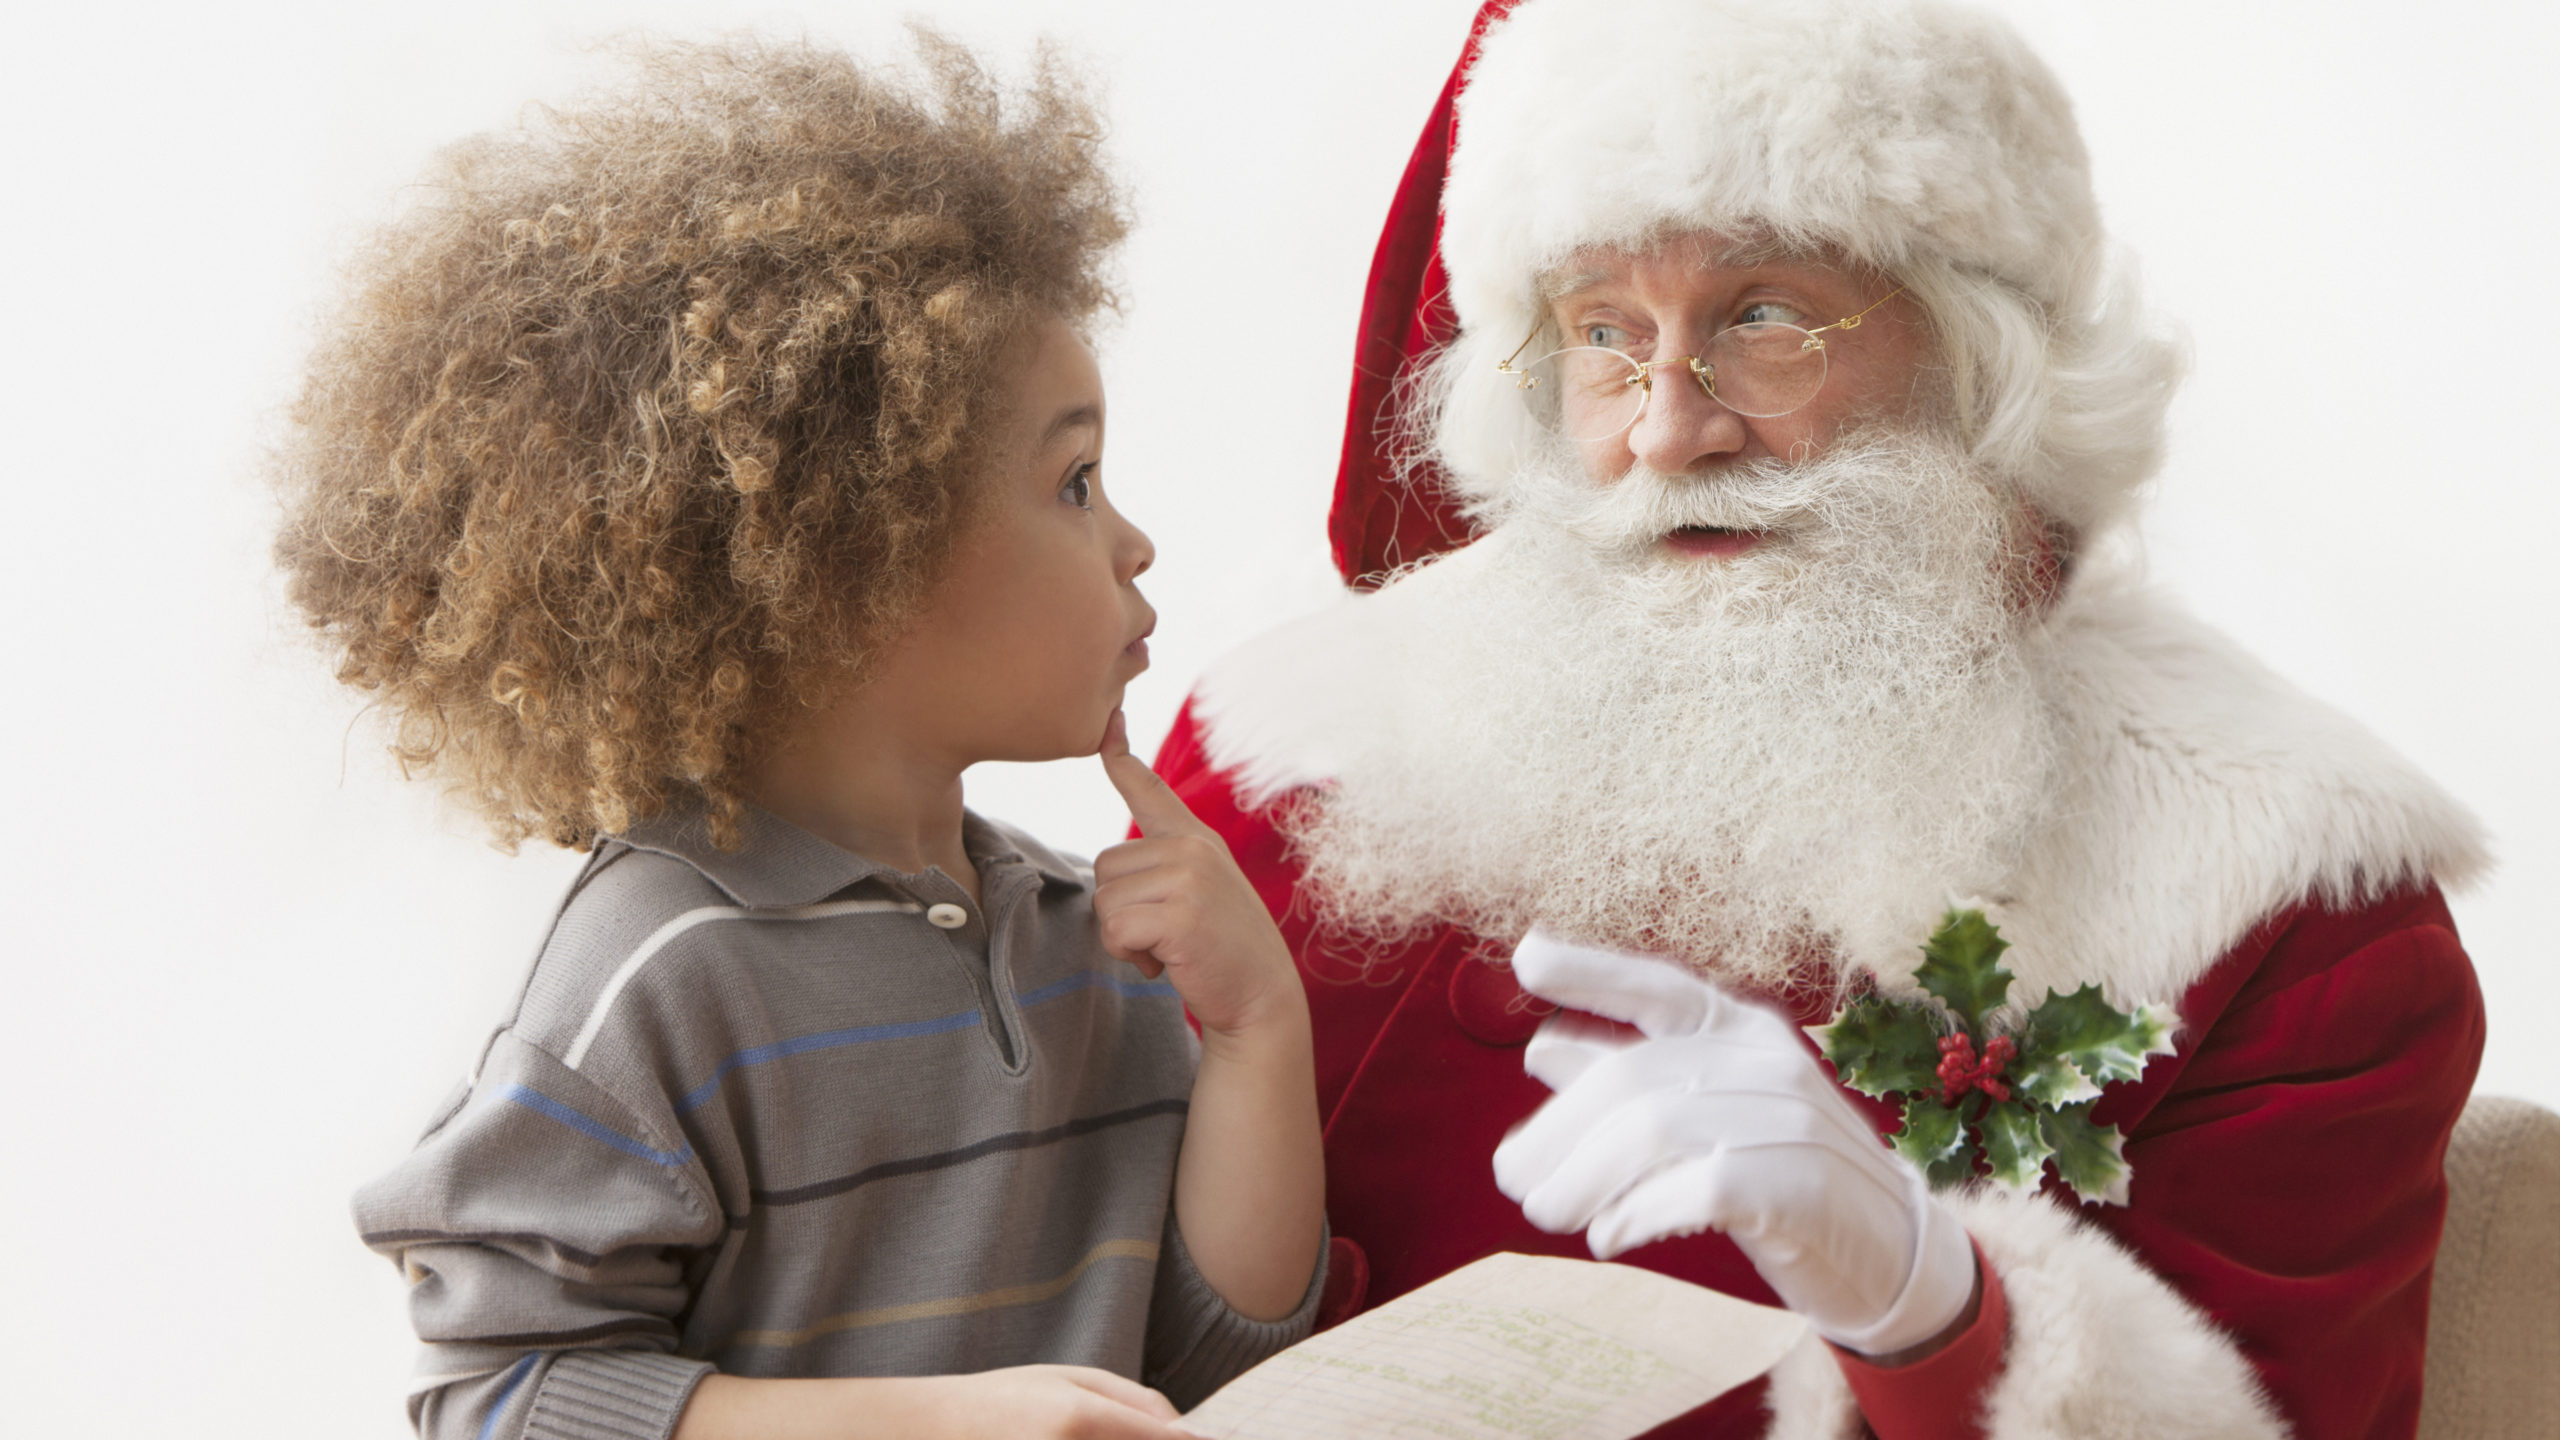 Ask The Dad: The Christmas Disaster